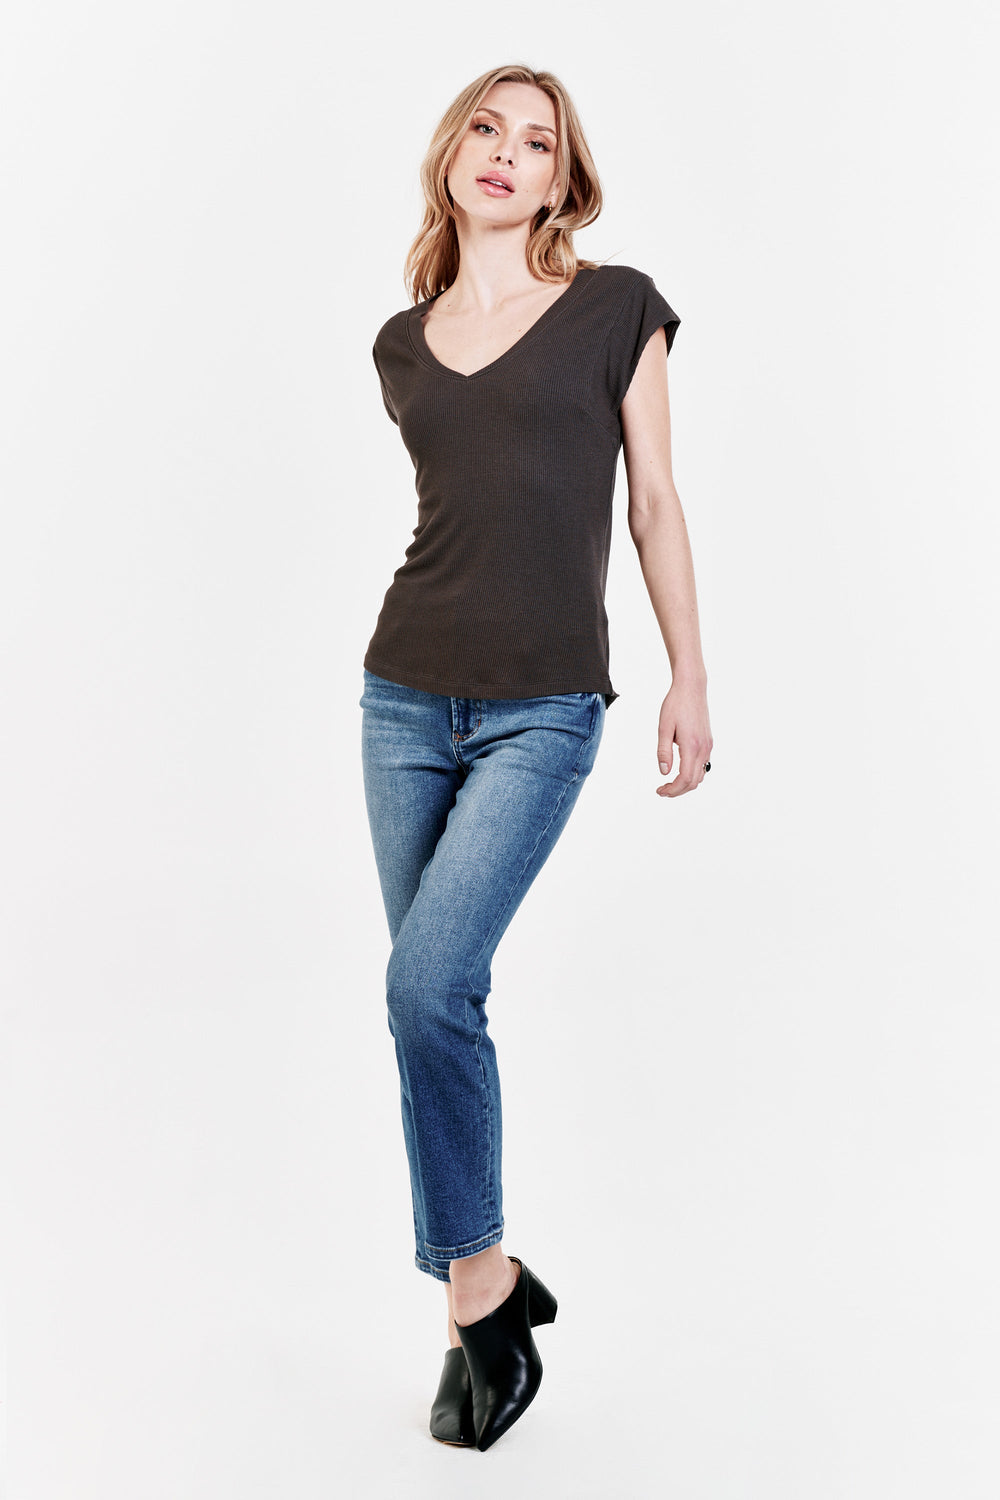 image of a female model wearing a URI THERMAL V-NECK TOP ONYX TOPS